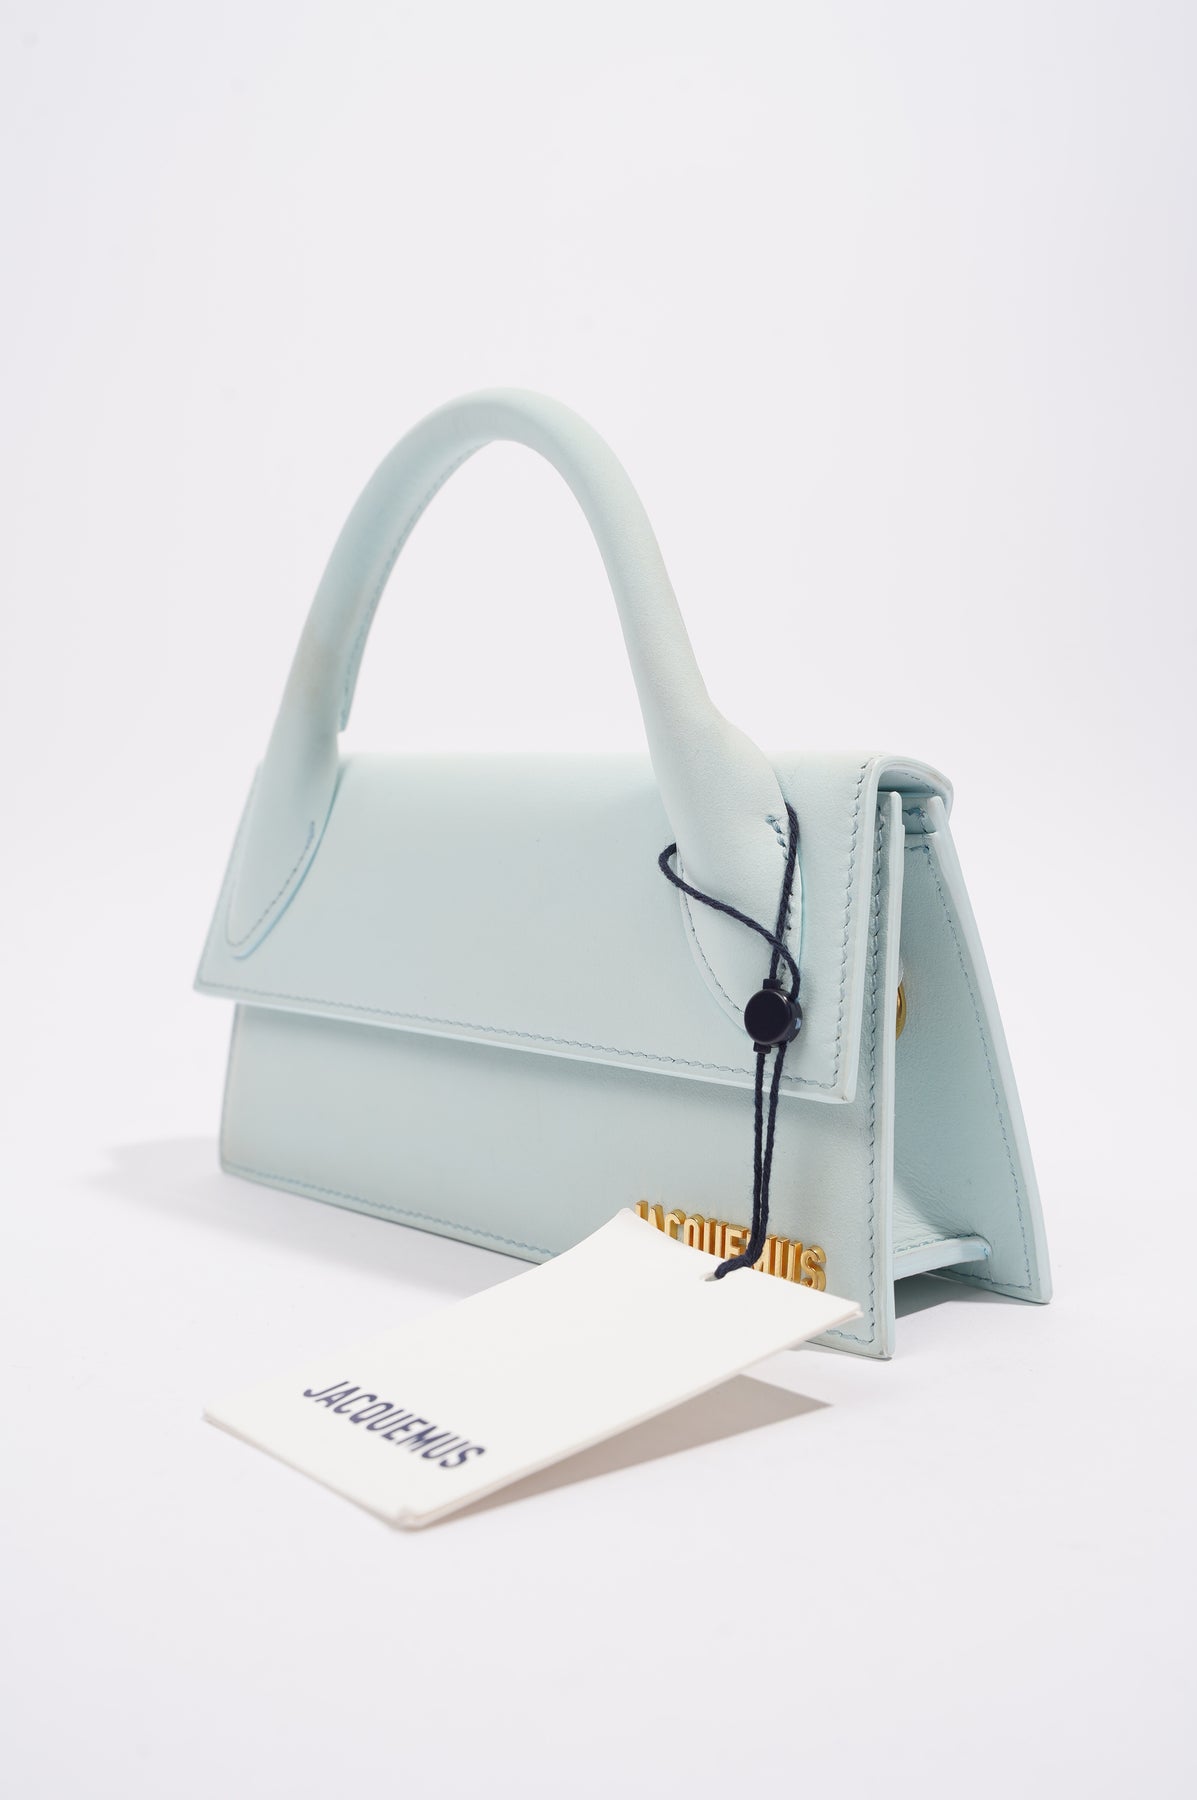 JACQUEMUS Le Chiquito Long Bag in Grey